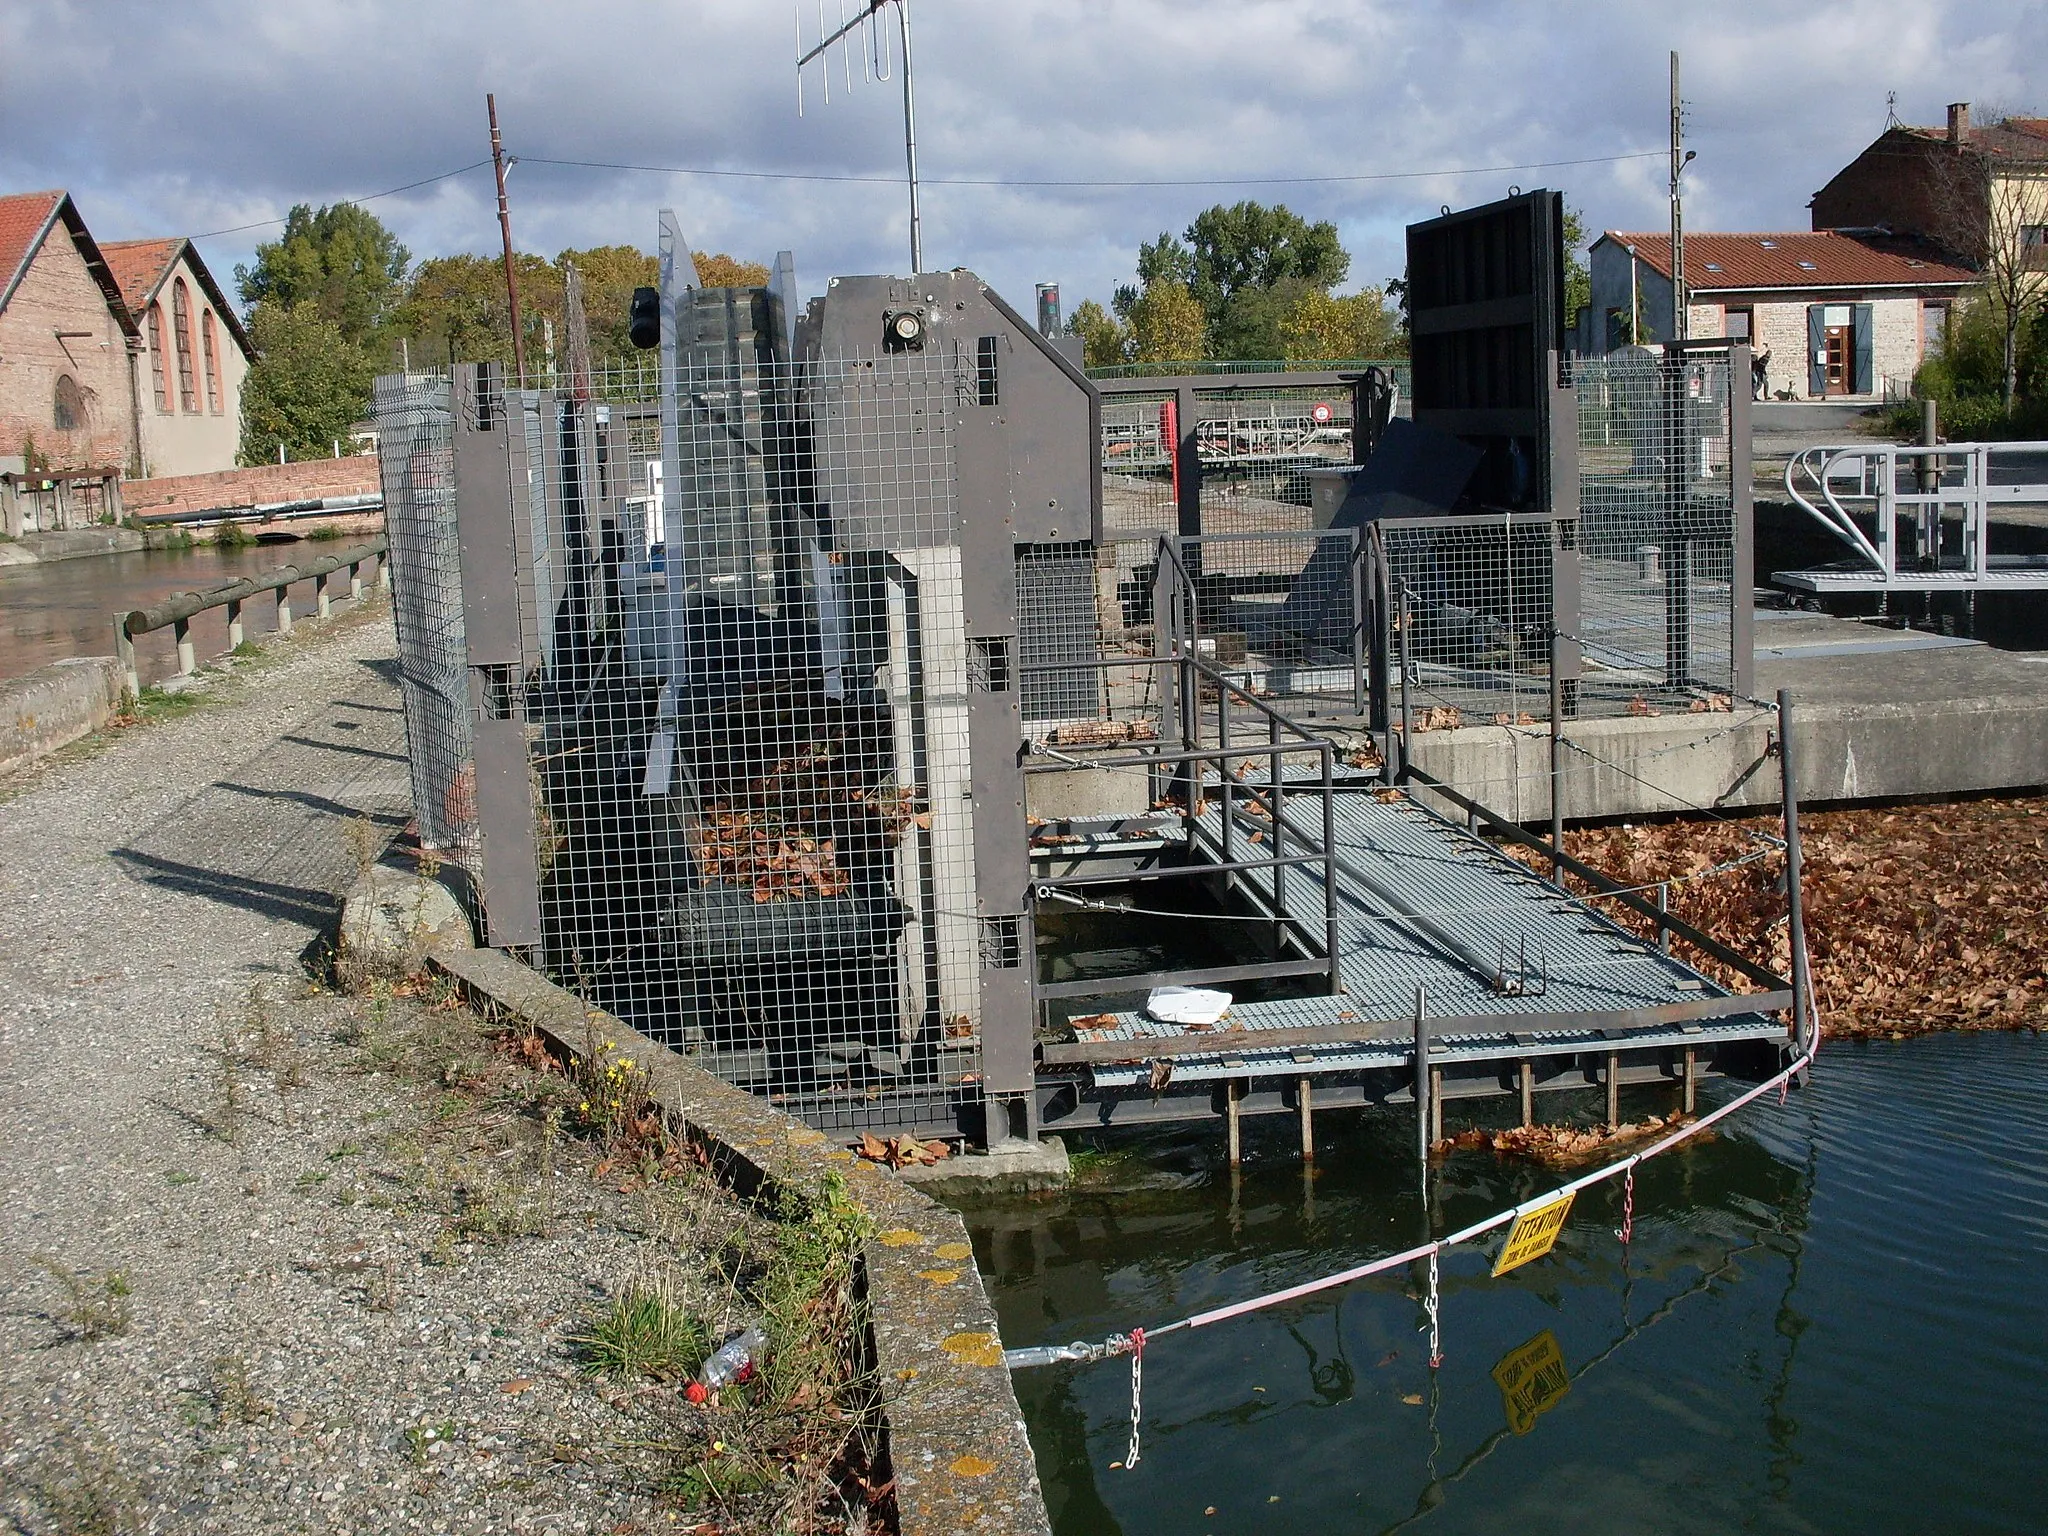 Photo showing: System to catch dead leaves floating in a canal, here on the Canal de Garonne, Toulouse